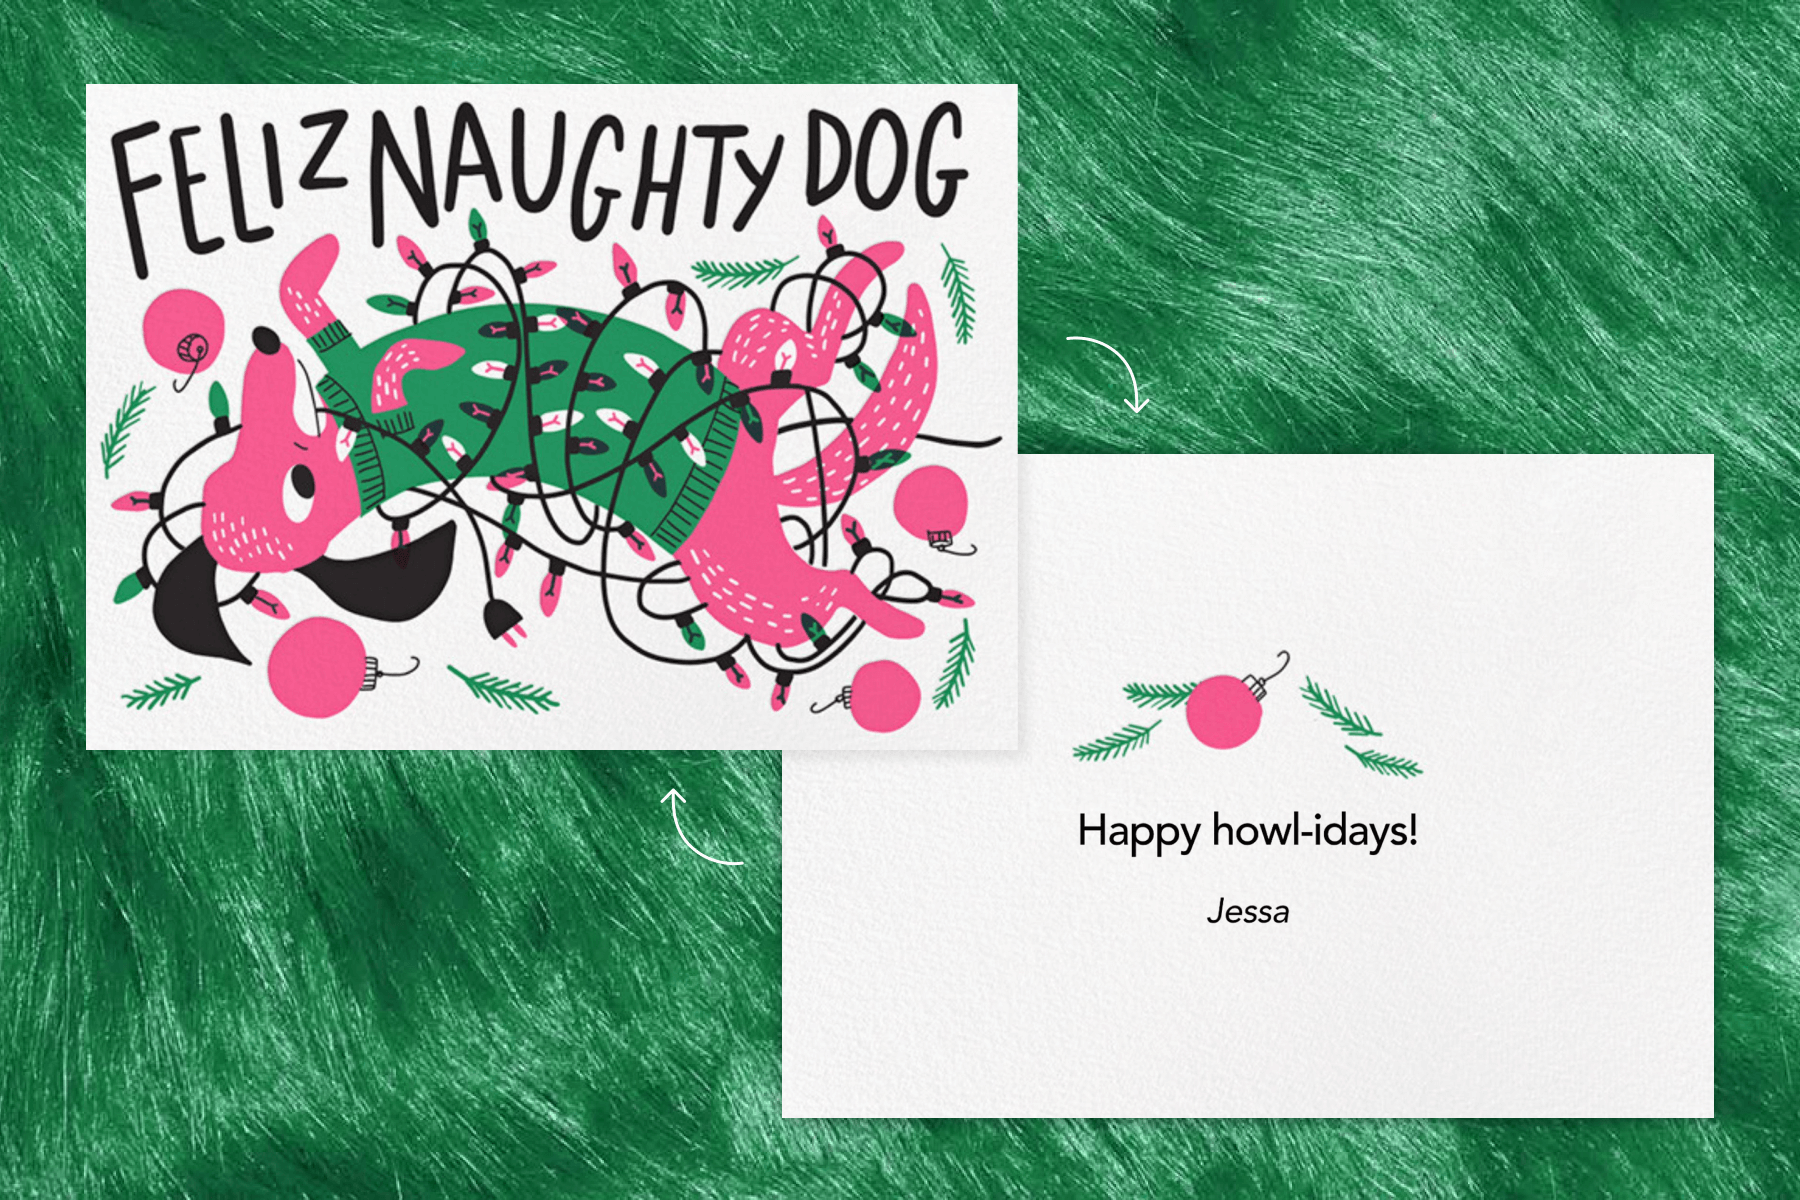 A card with a pink dog in a green sweater tangled in string lights and the words “feliz naughty dog,” and the flip side of that card.